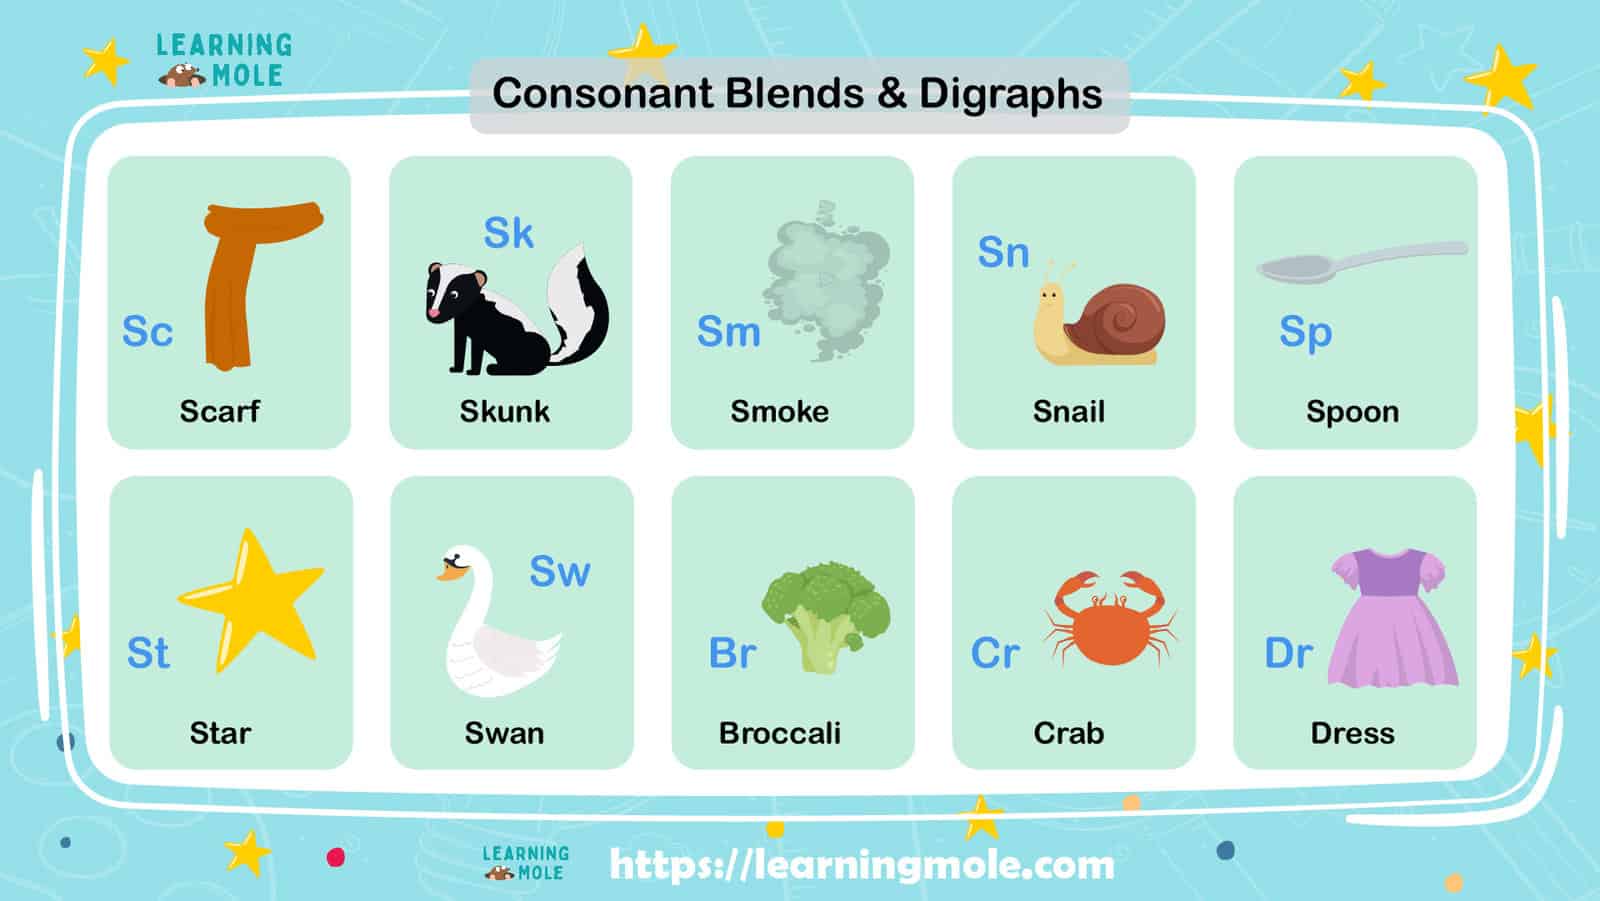 What is a Consonant Blend?